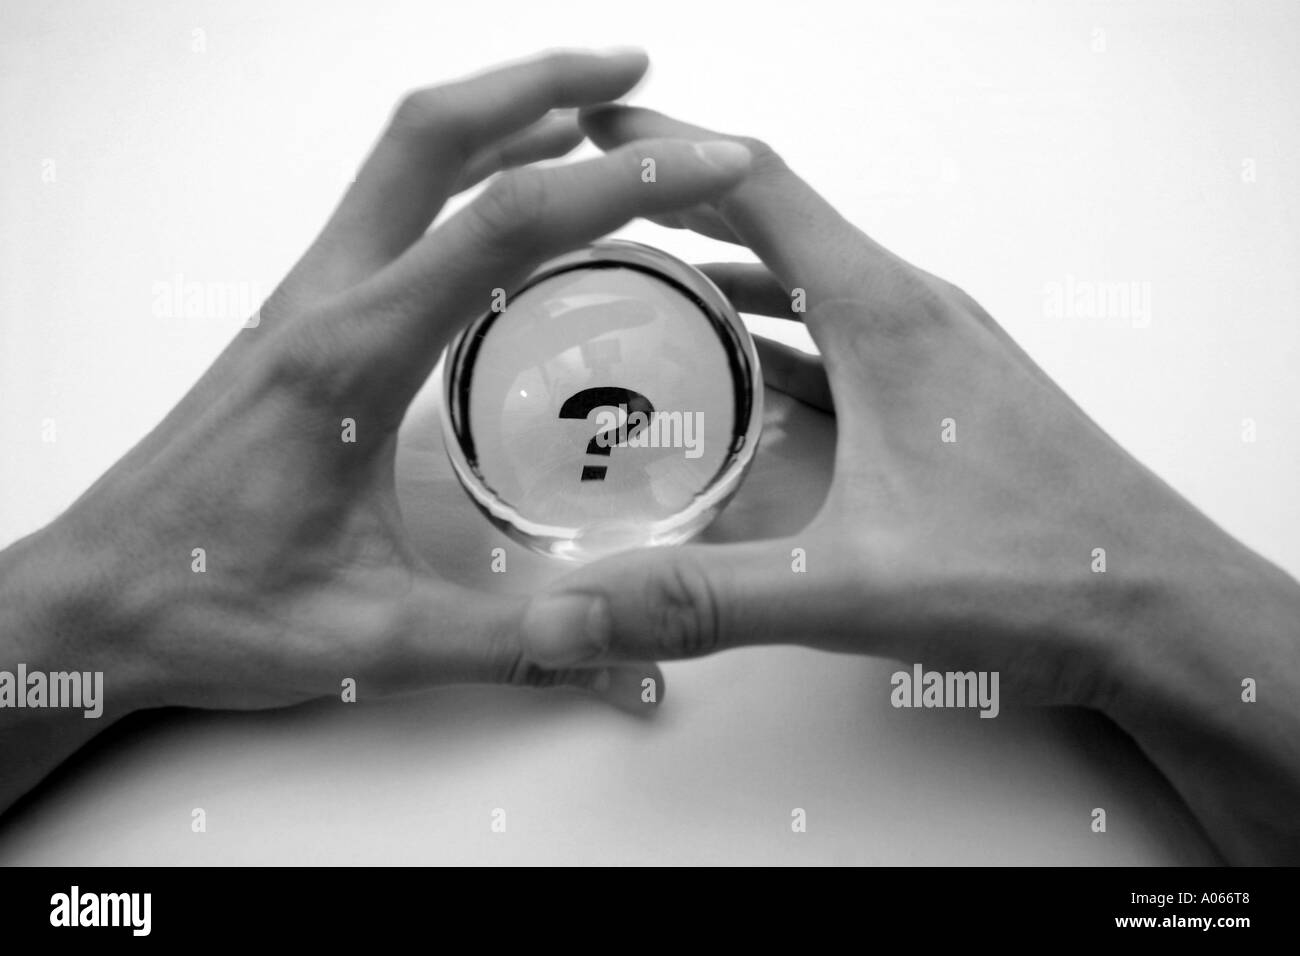 Two hands of a person seen near a circular glass having a question mark on it Stock Photo